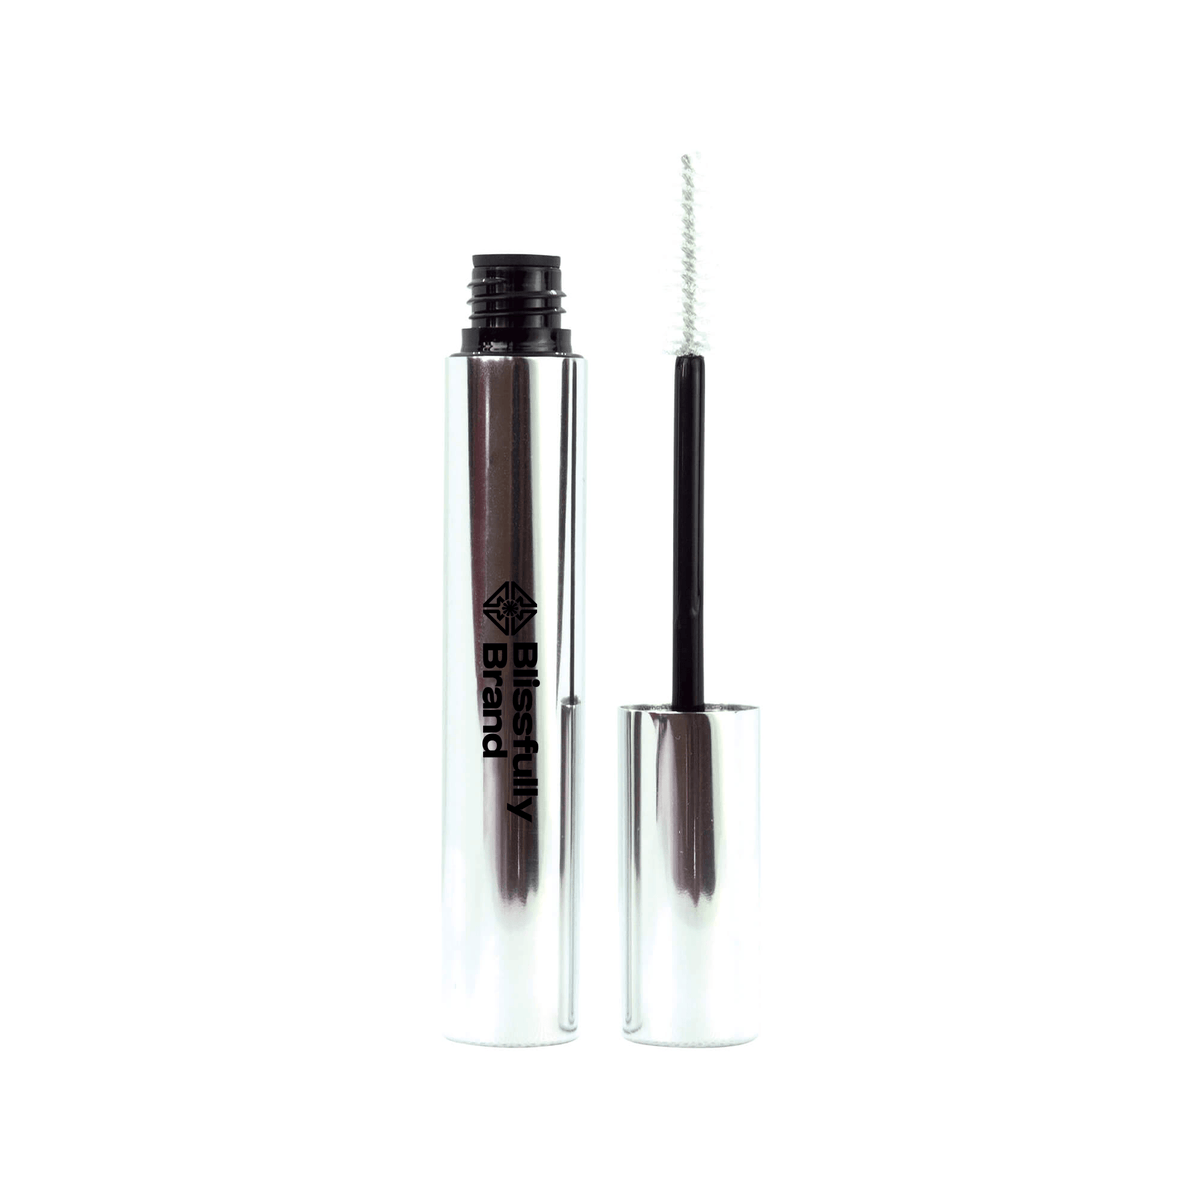 Eyebrow Volumizing Gel Thickens & Shapes - Clear - Vegan | Blissfully Brand Beauty